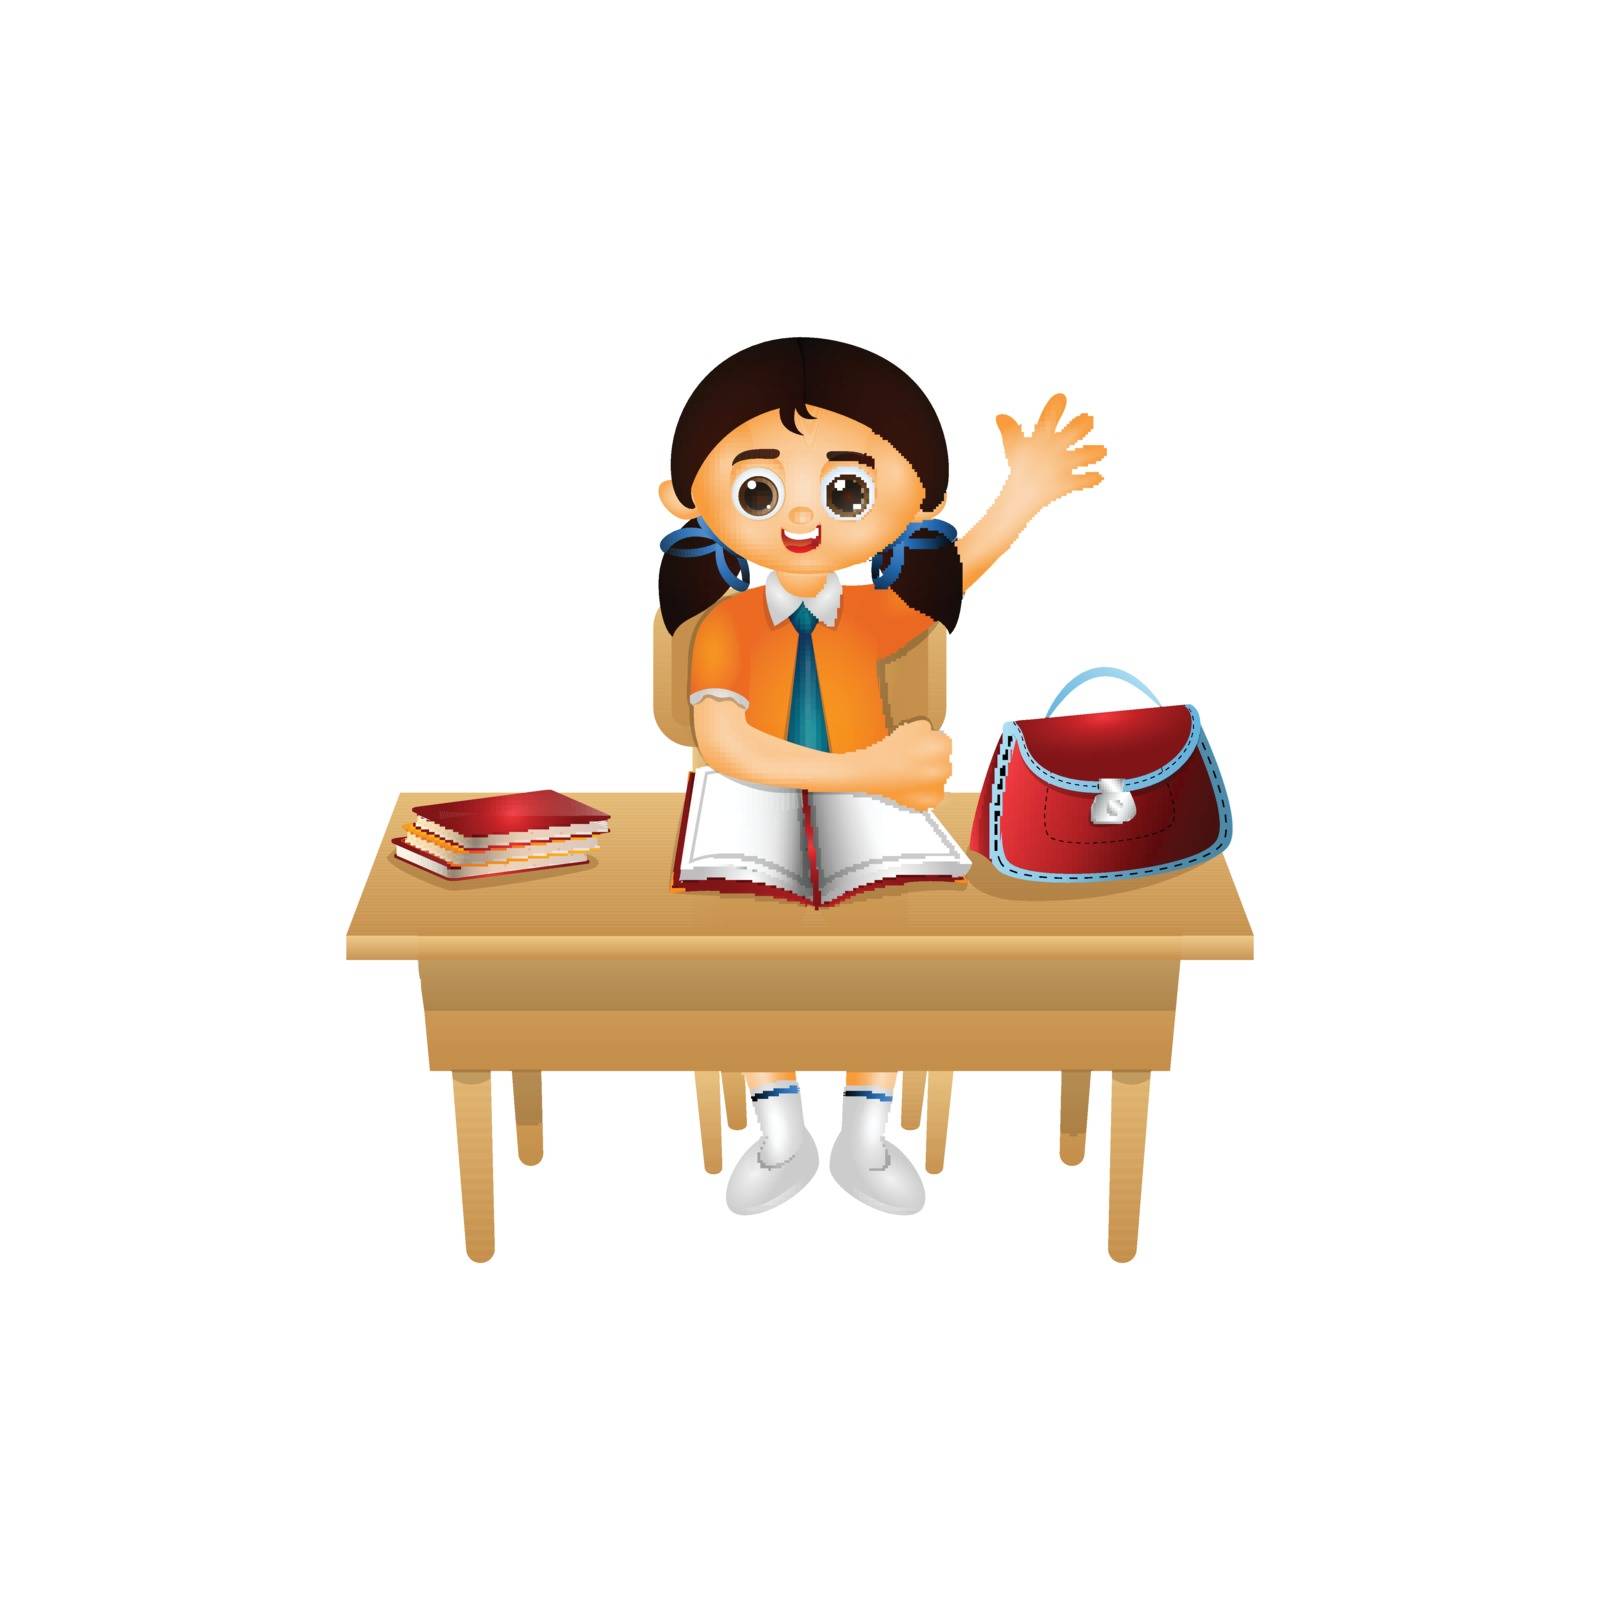 Cartoon character of girl sitting on study table.